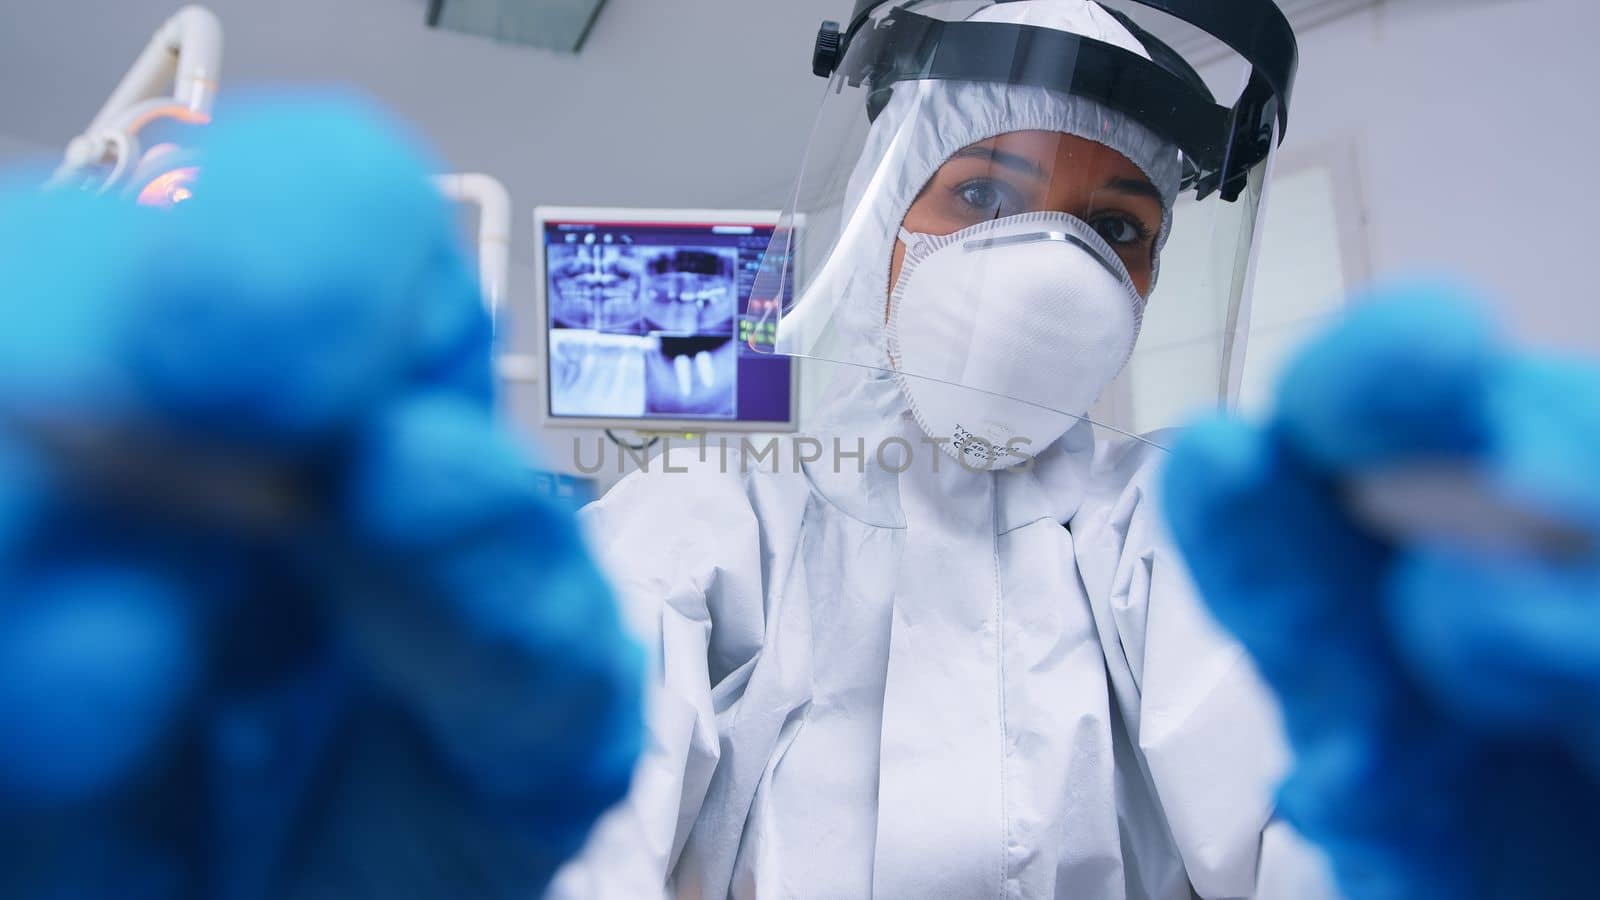 Pov of dentist in ppe suit working on patient mouth hygine by DCStudio